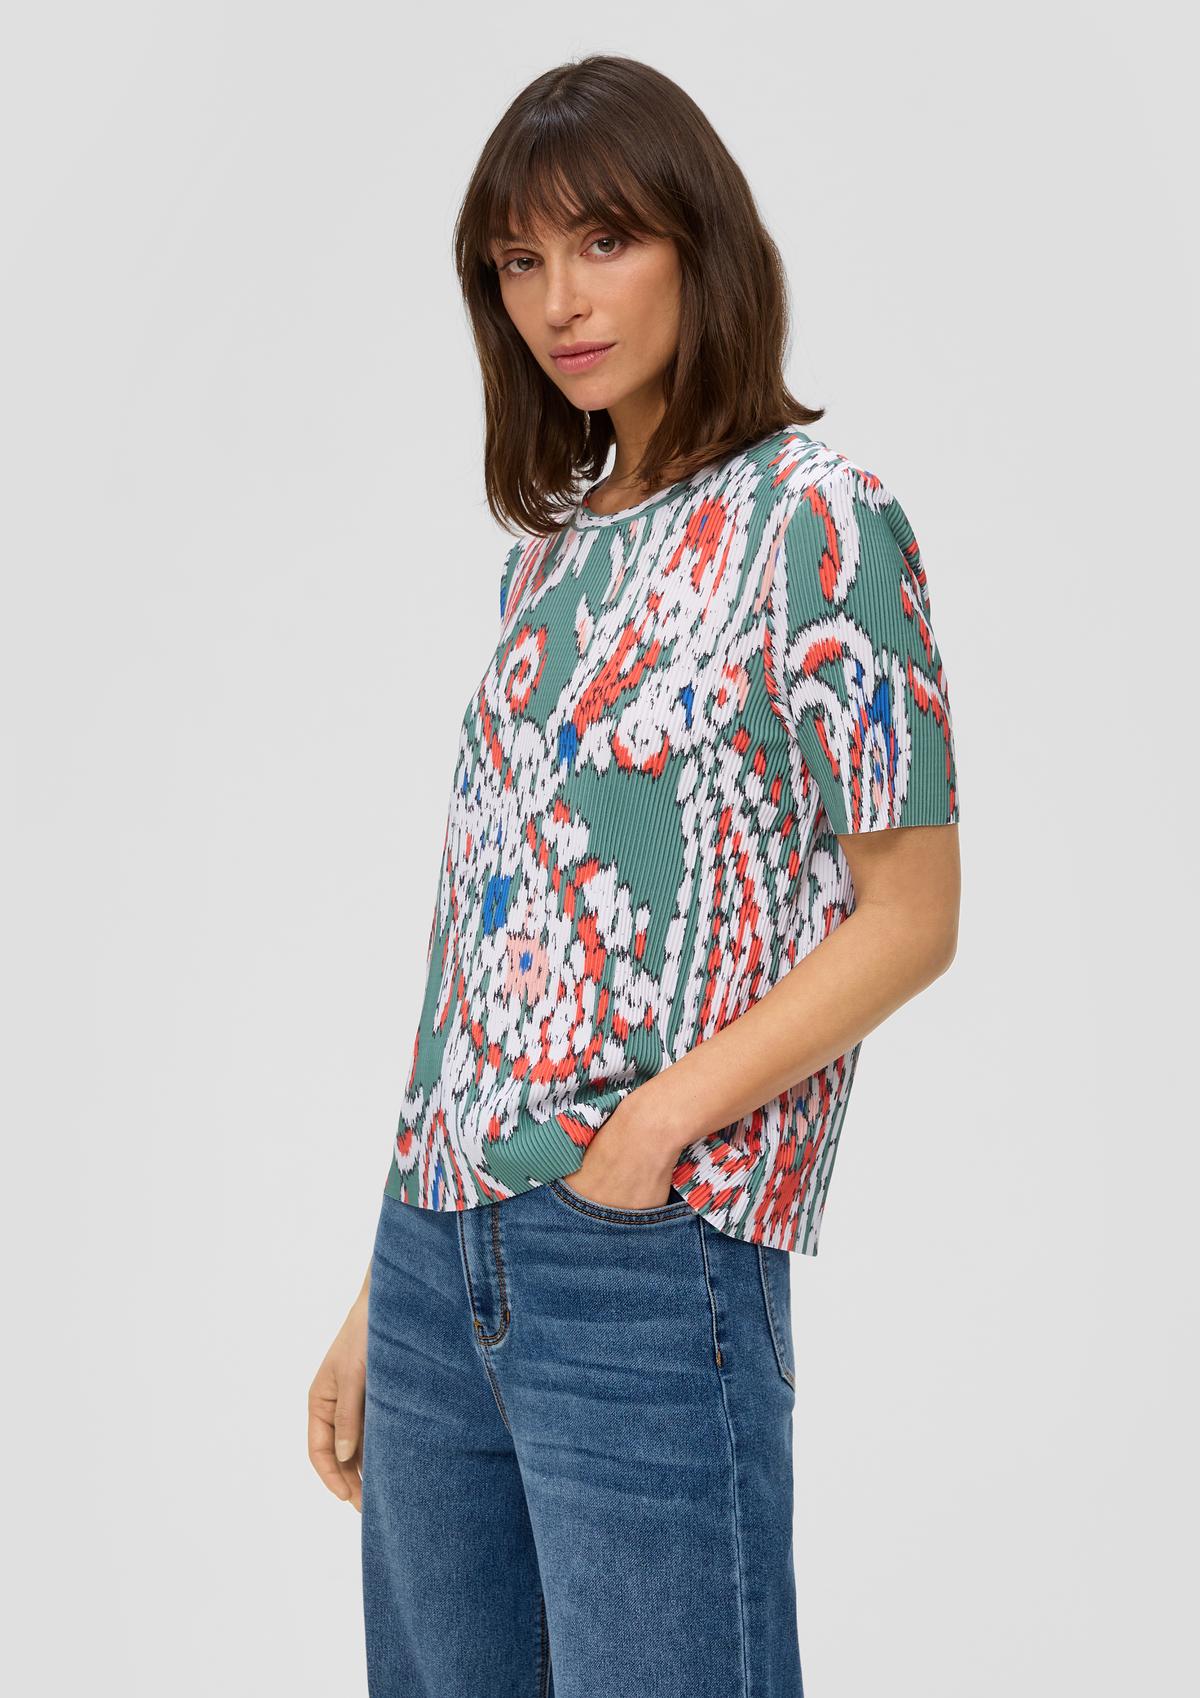 s.Oliver T-shirt with pleats